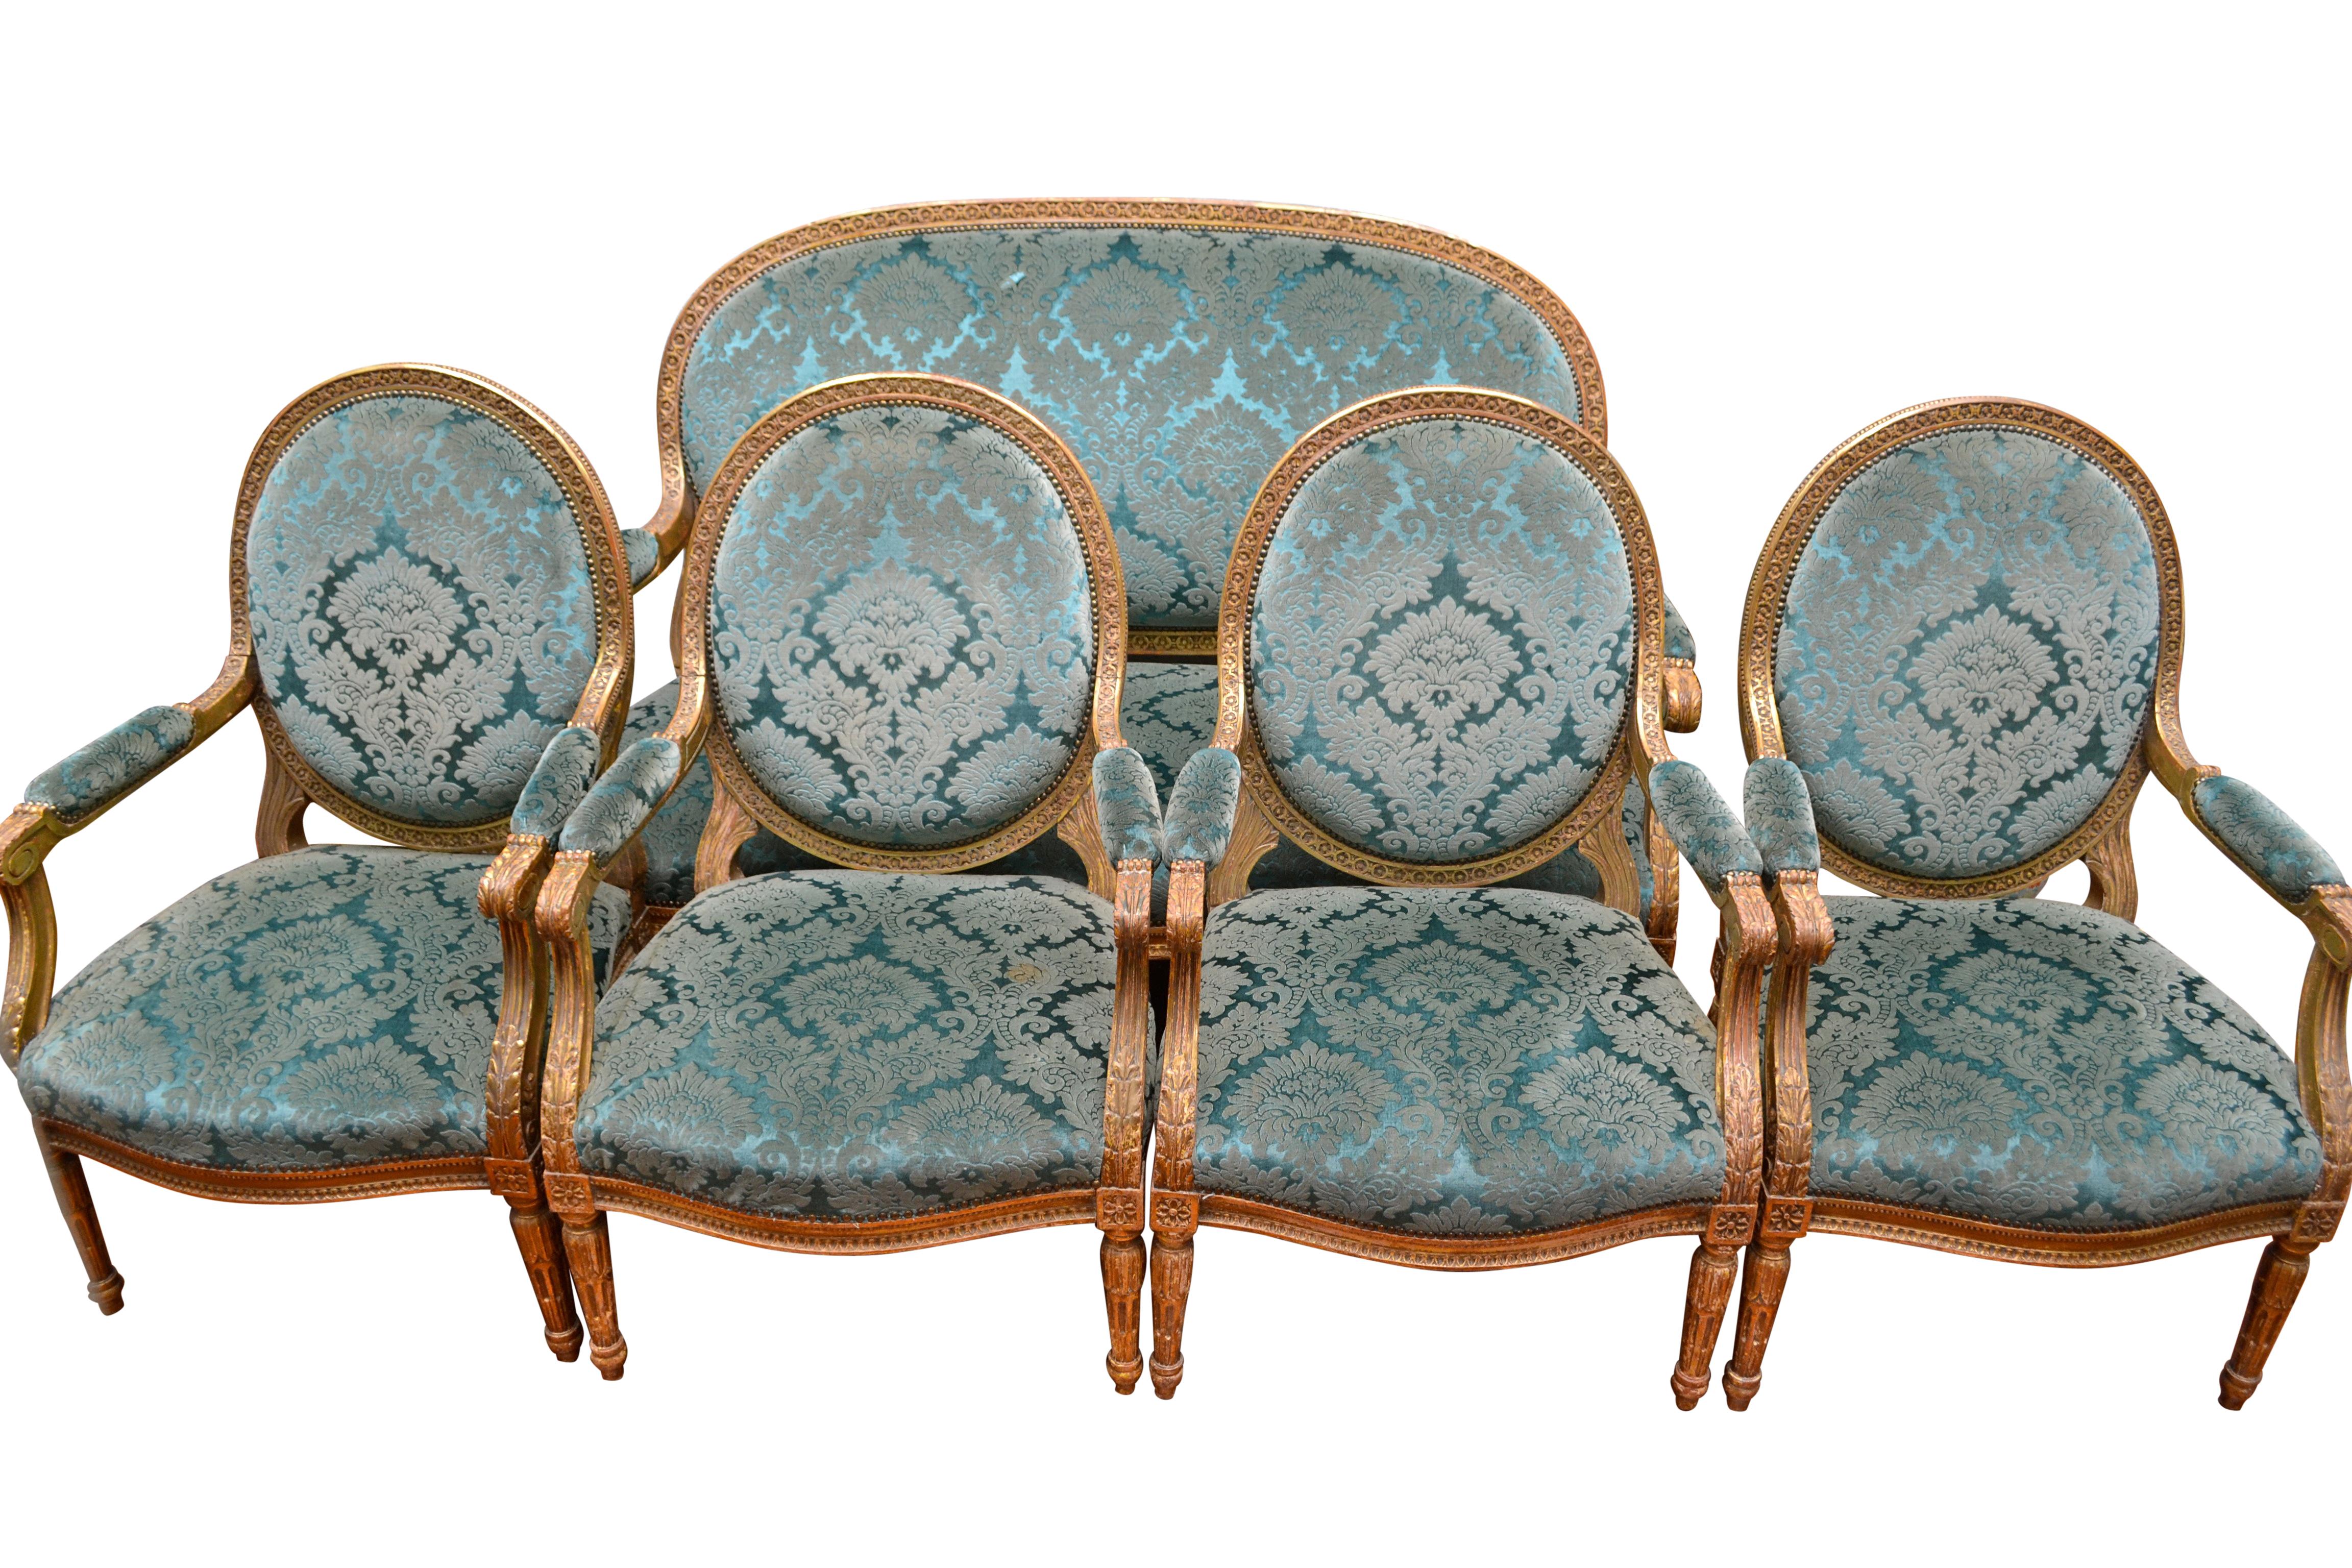 A palatial scale Louis XVI style salon set comprising four arm chairs and a matching sofa. The deeply carved frames are finished in gold leaf and upholstered in antique turquoise Italian silk velvet that originally hung as drapes in an English